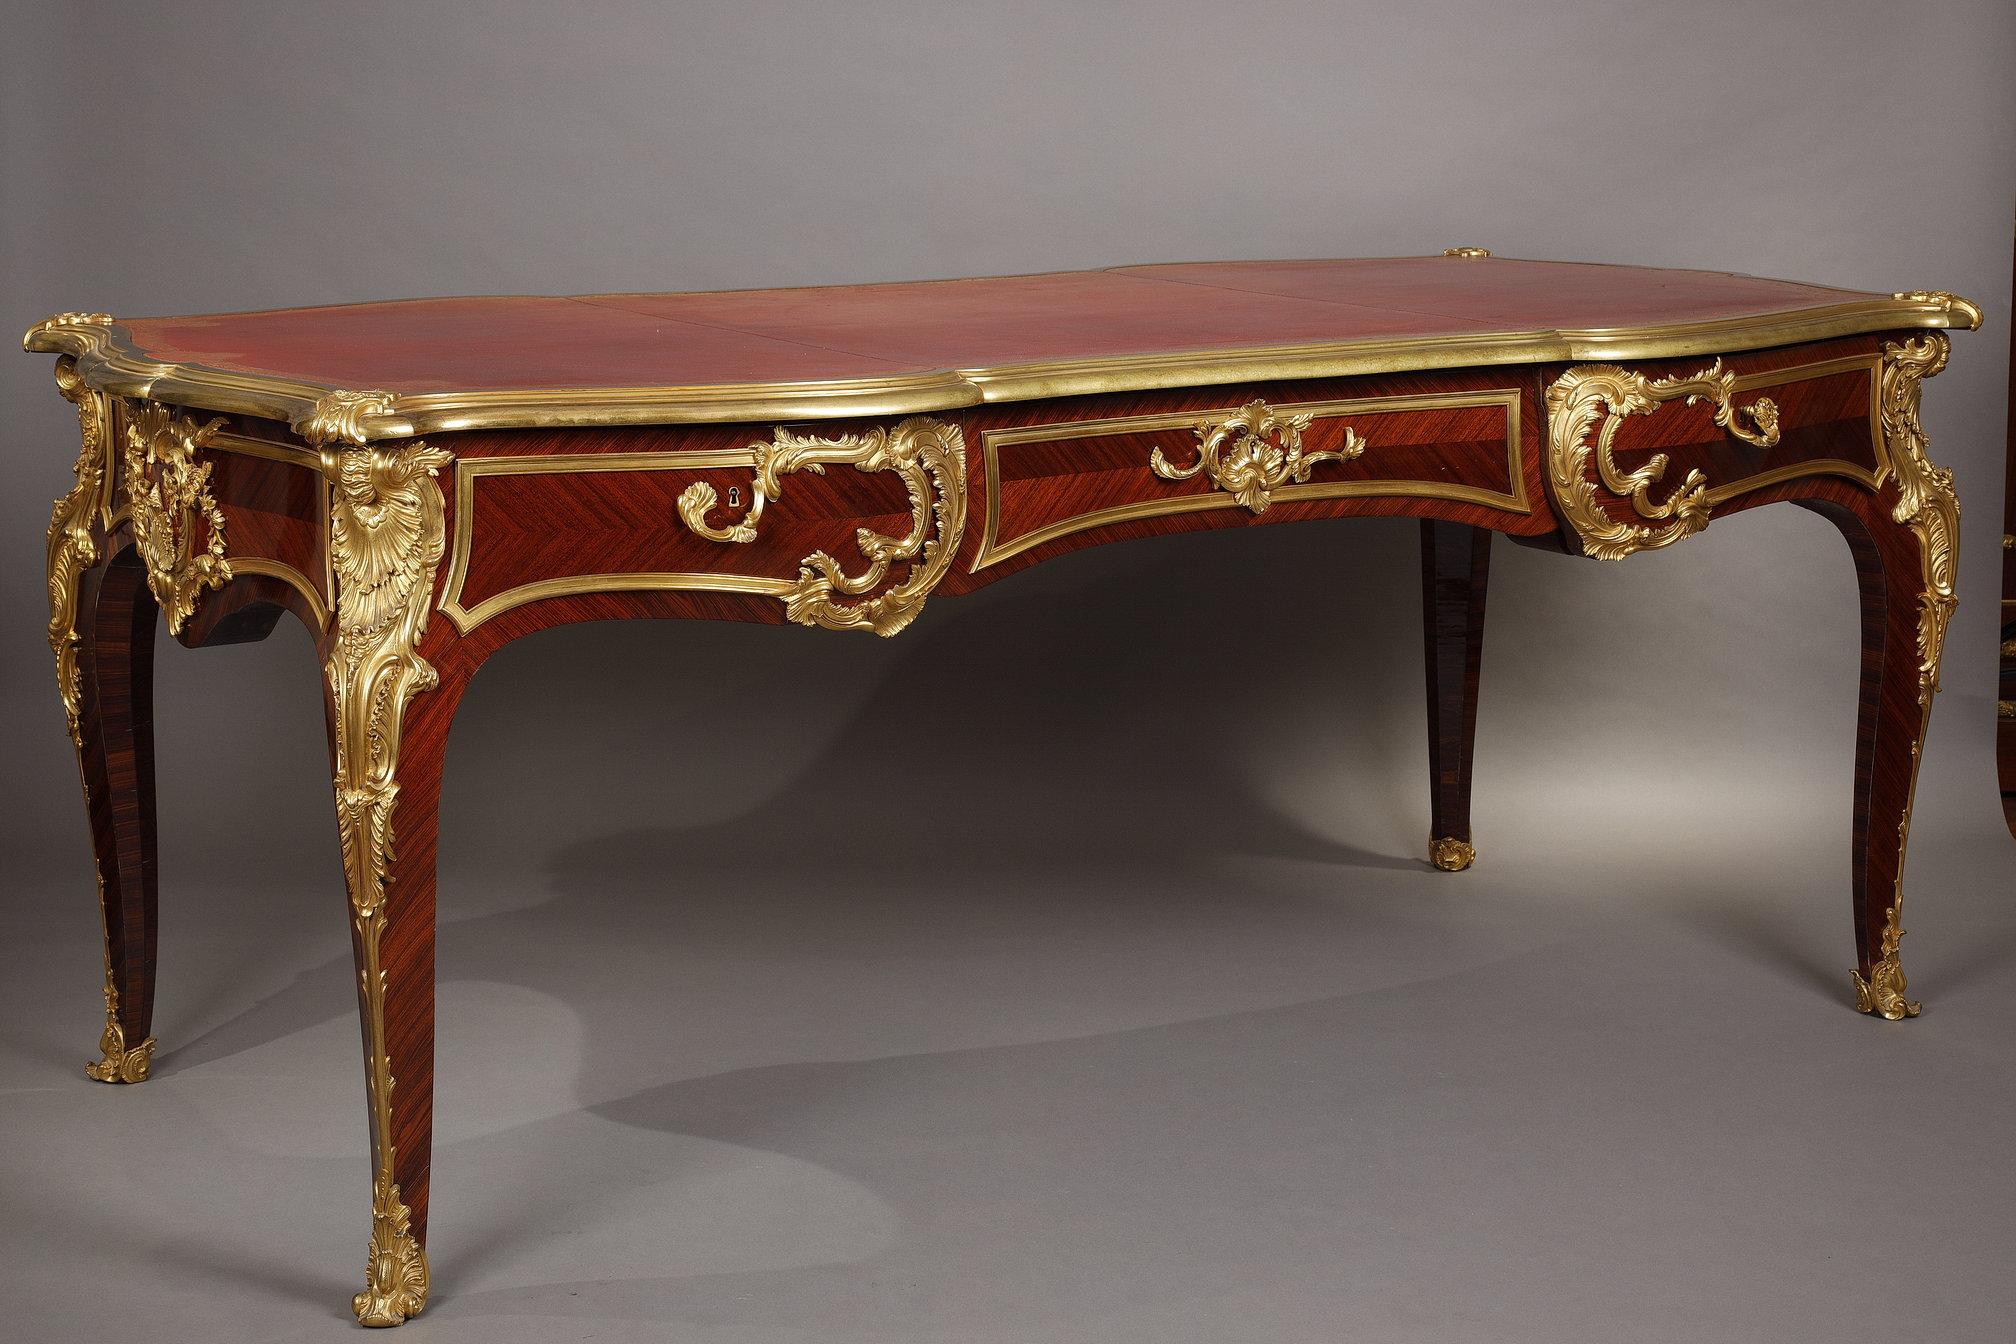 Large veneered wood flat desk attributed to G. Durand, opening with three frieze drawers. Mounted with Rocaille style chiseled ormolu representing shells, foliage and flower garlands. Raised on four cabriole legs ornamented with chiseled